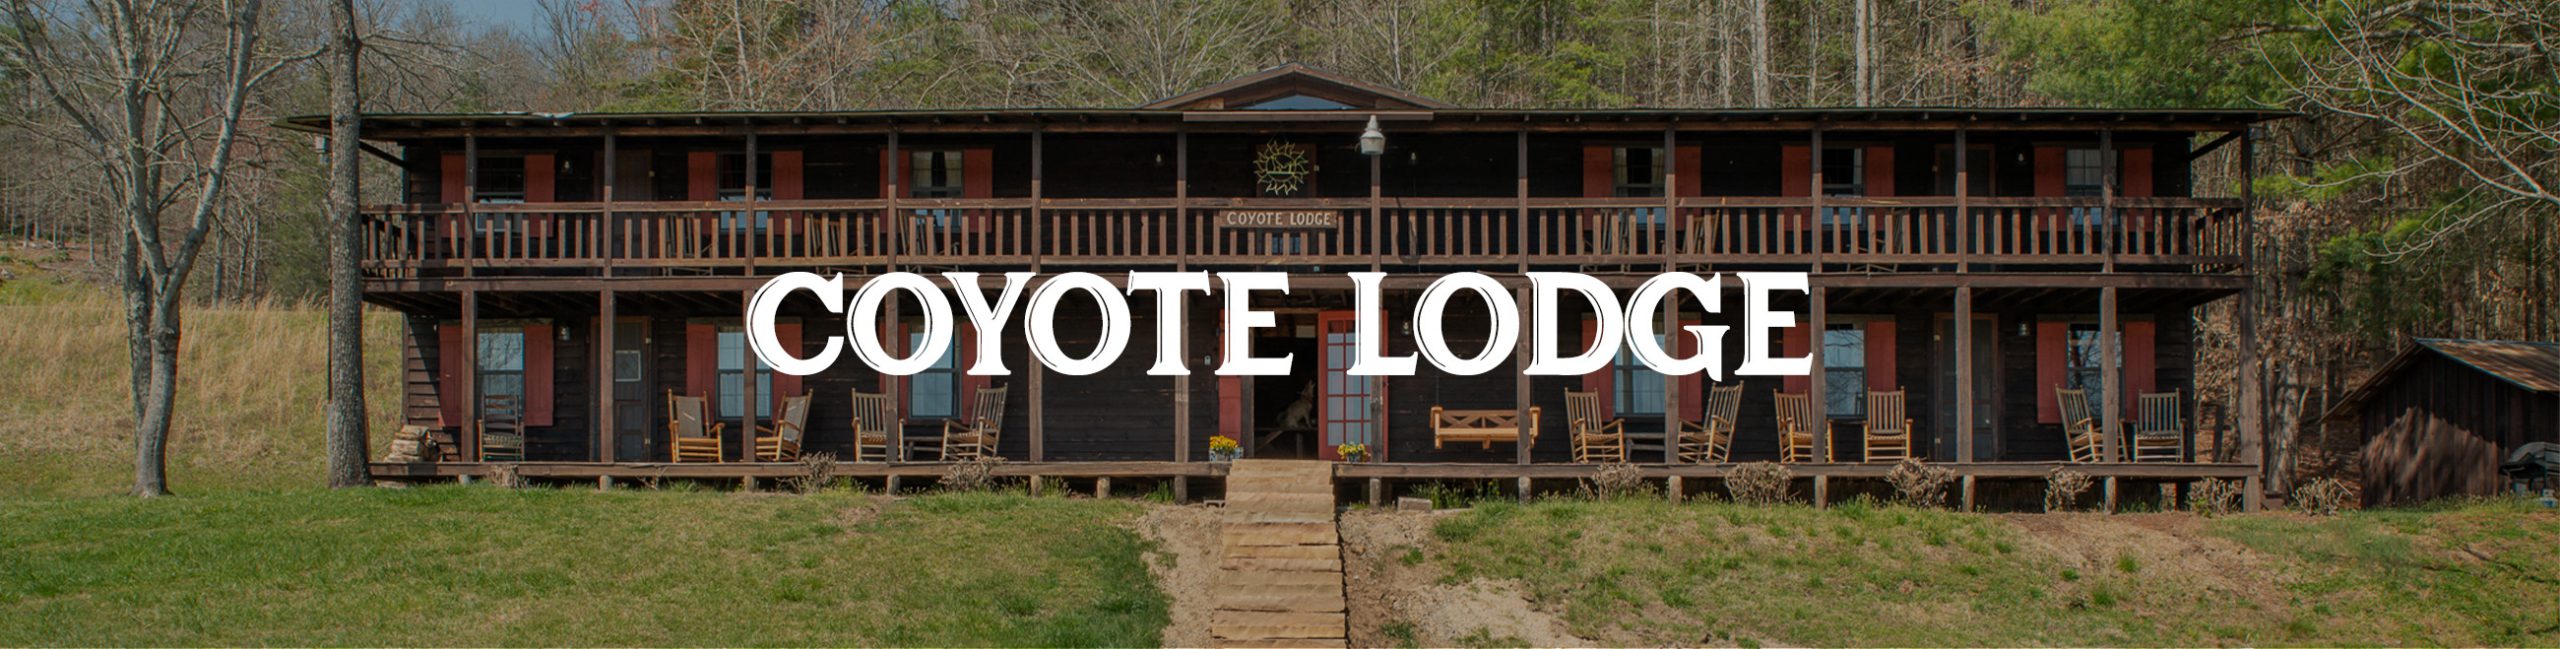 Deerwoode Reserve | Coyote lodge in Nashville, Tennessee offers rustic accommodations and a unique wilderness experience.